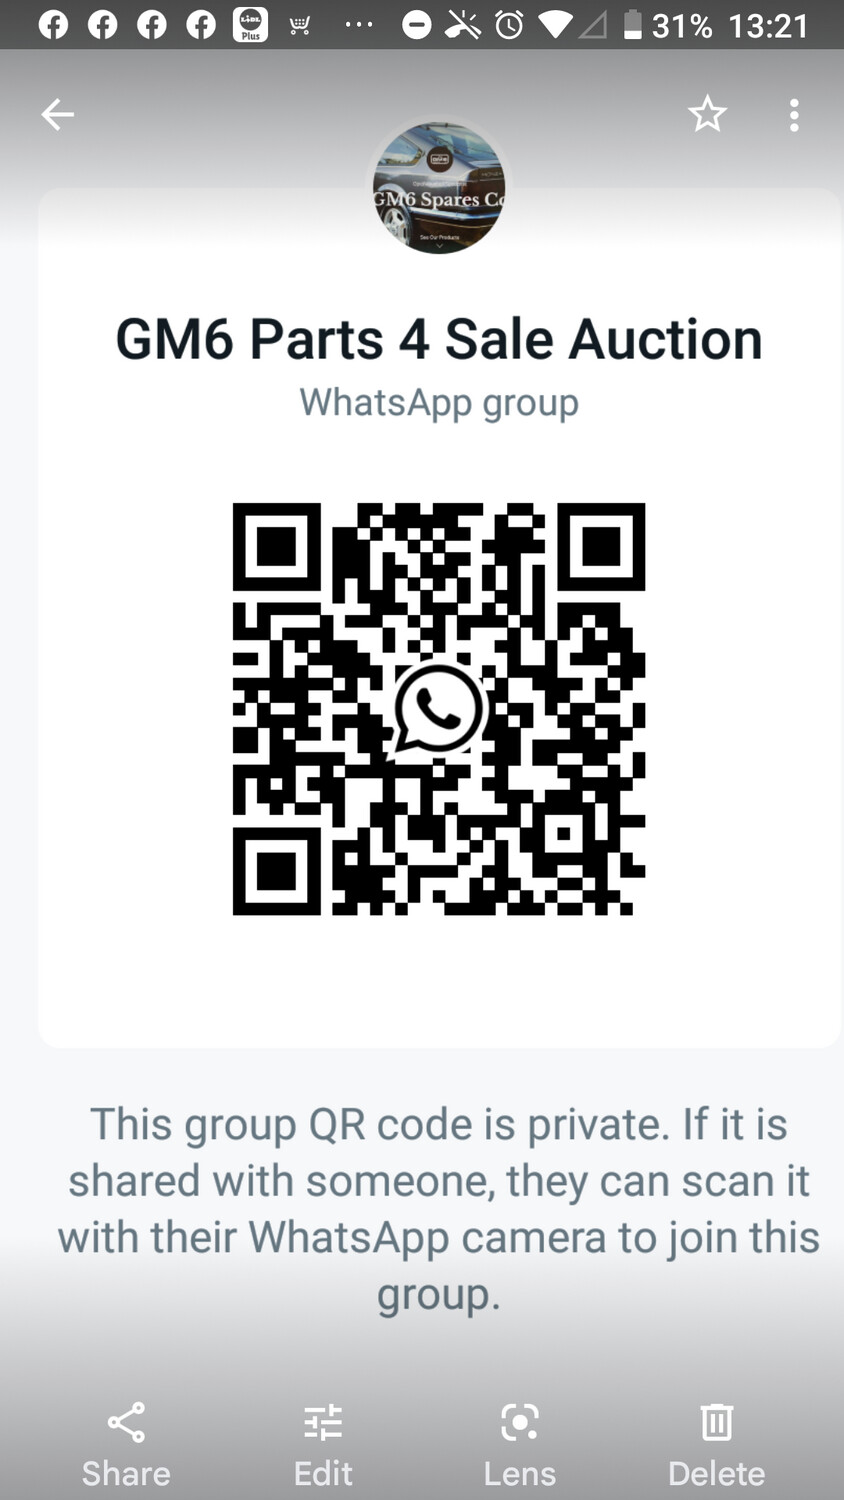 From within WhatsApp use the camera to scan this QR code to join the GM6 For Sale group.